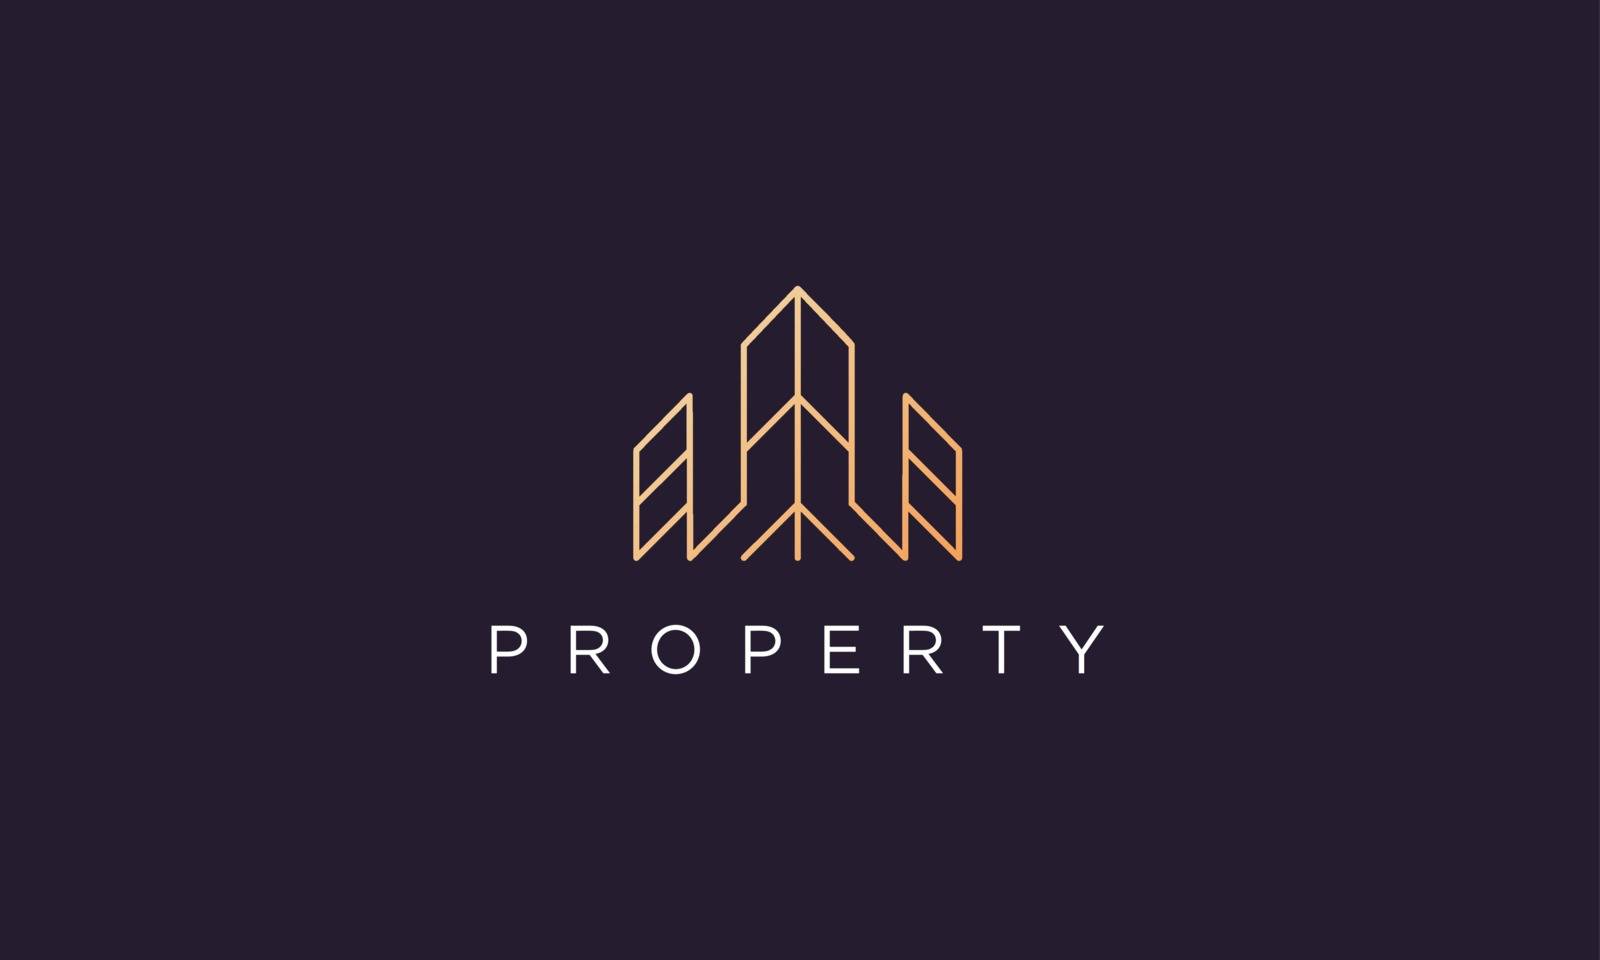 luxury and classy real estate property logo design in a simple and modern style by murnifine